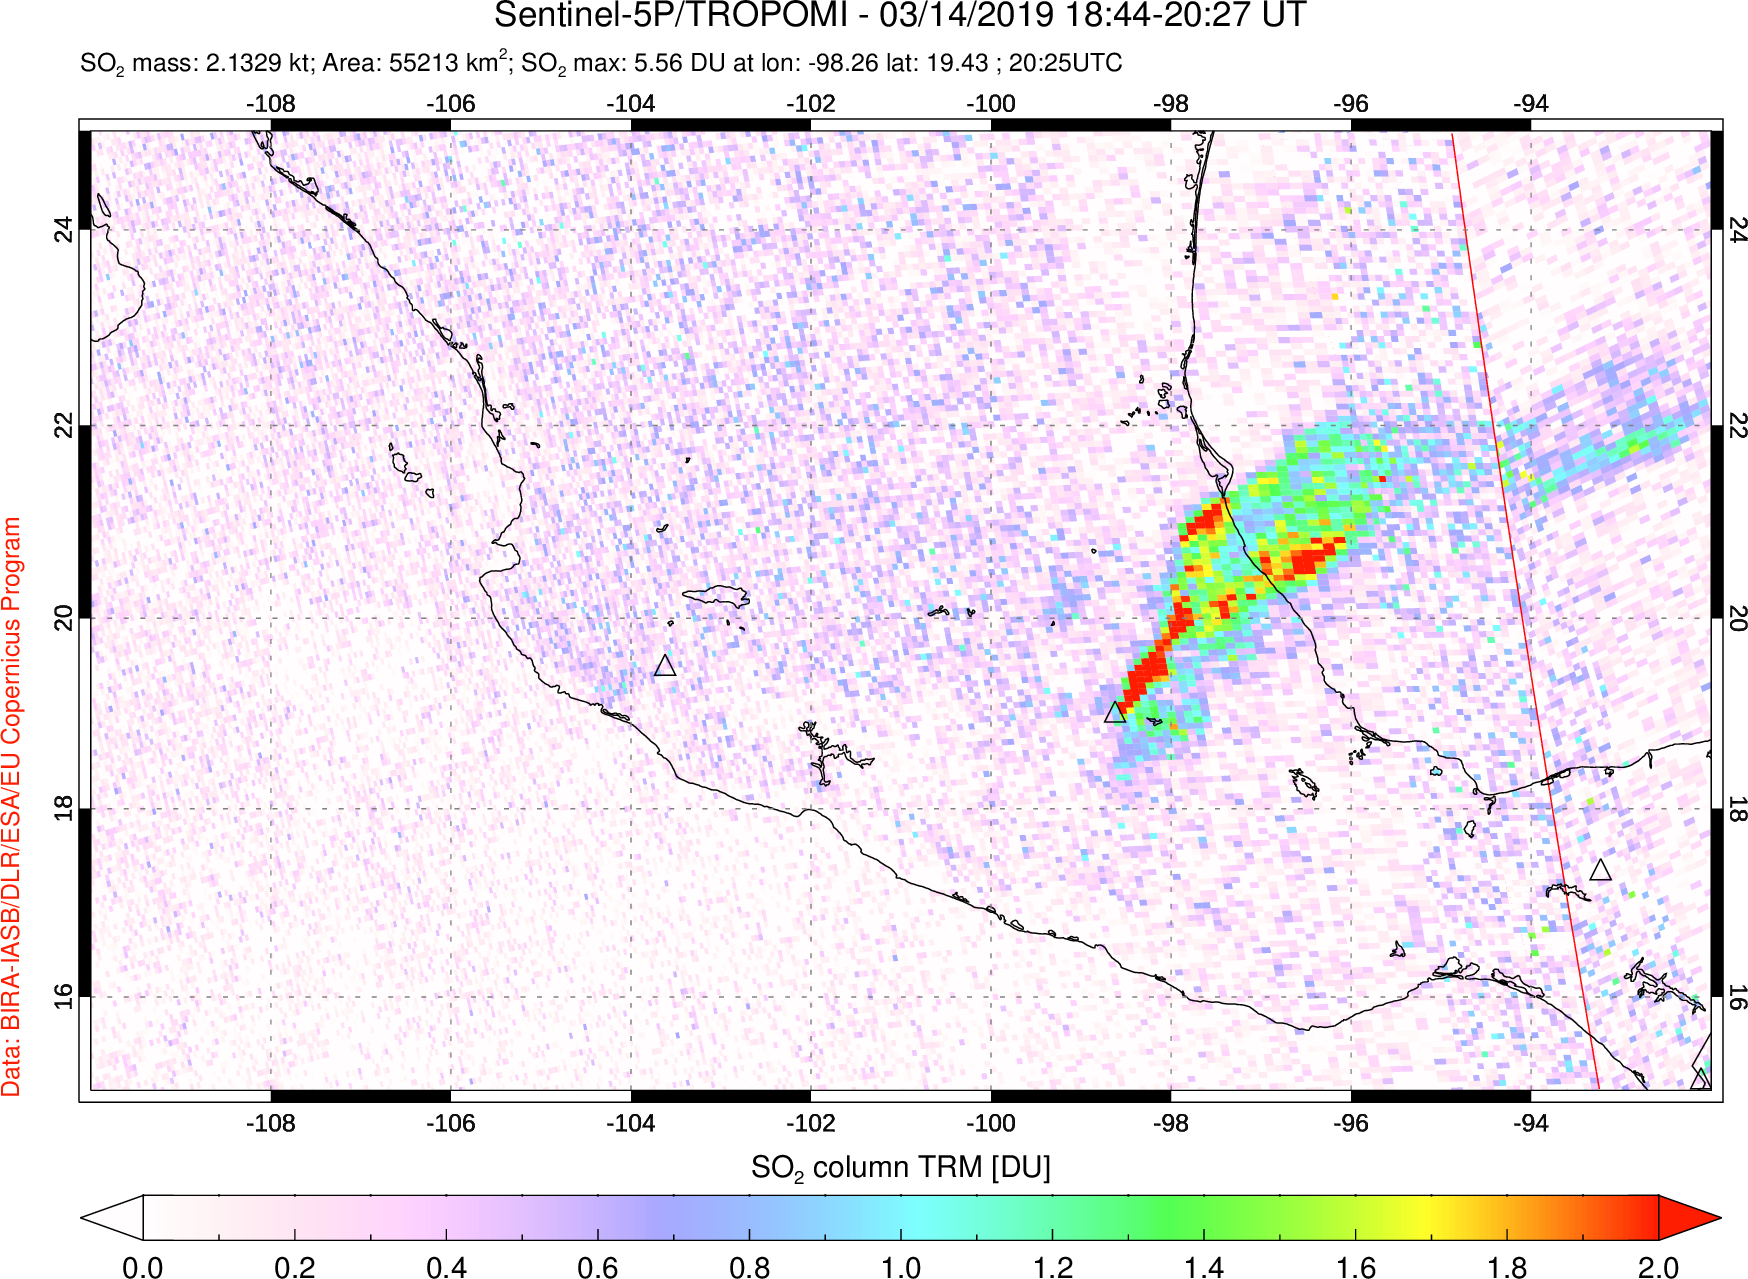 A sulfur dioxide image over Mexico on Mar 14, 2019.